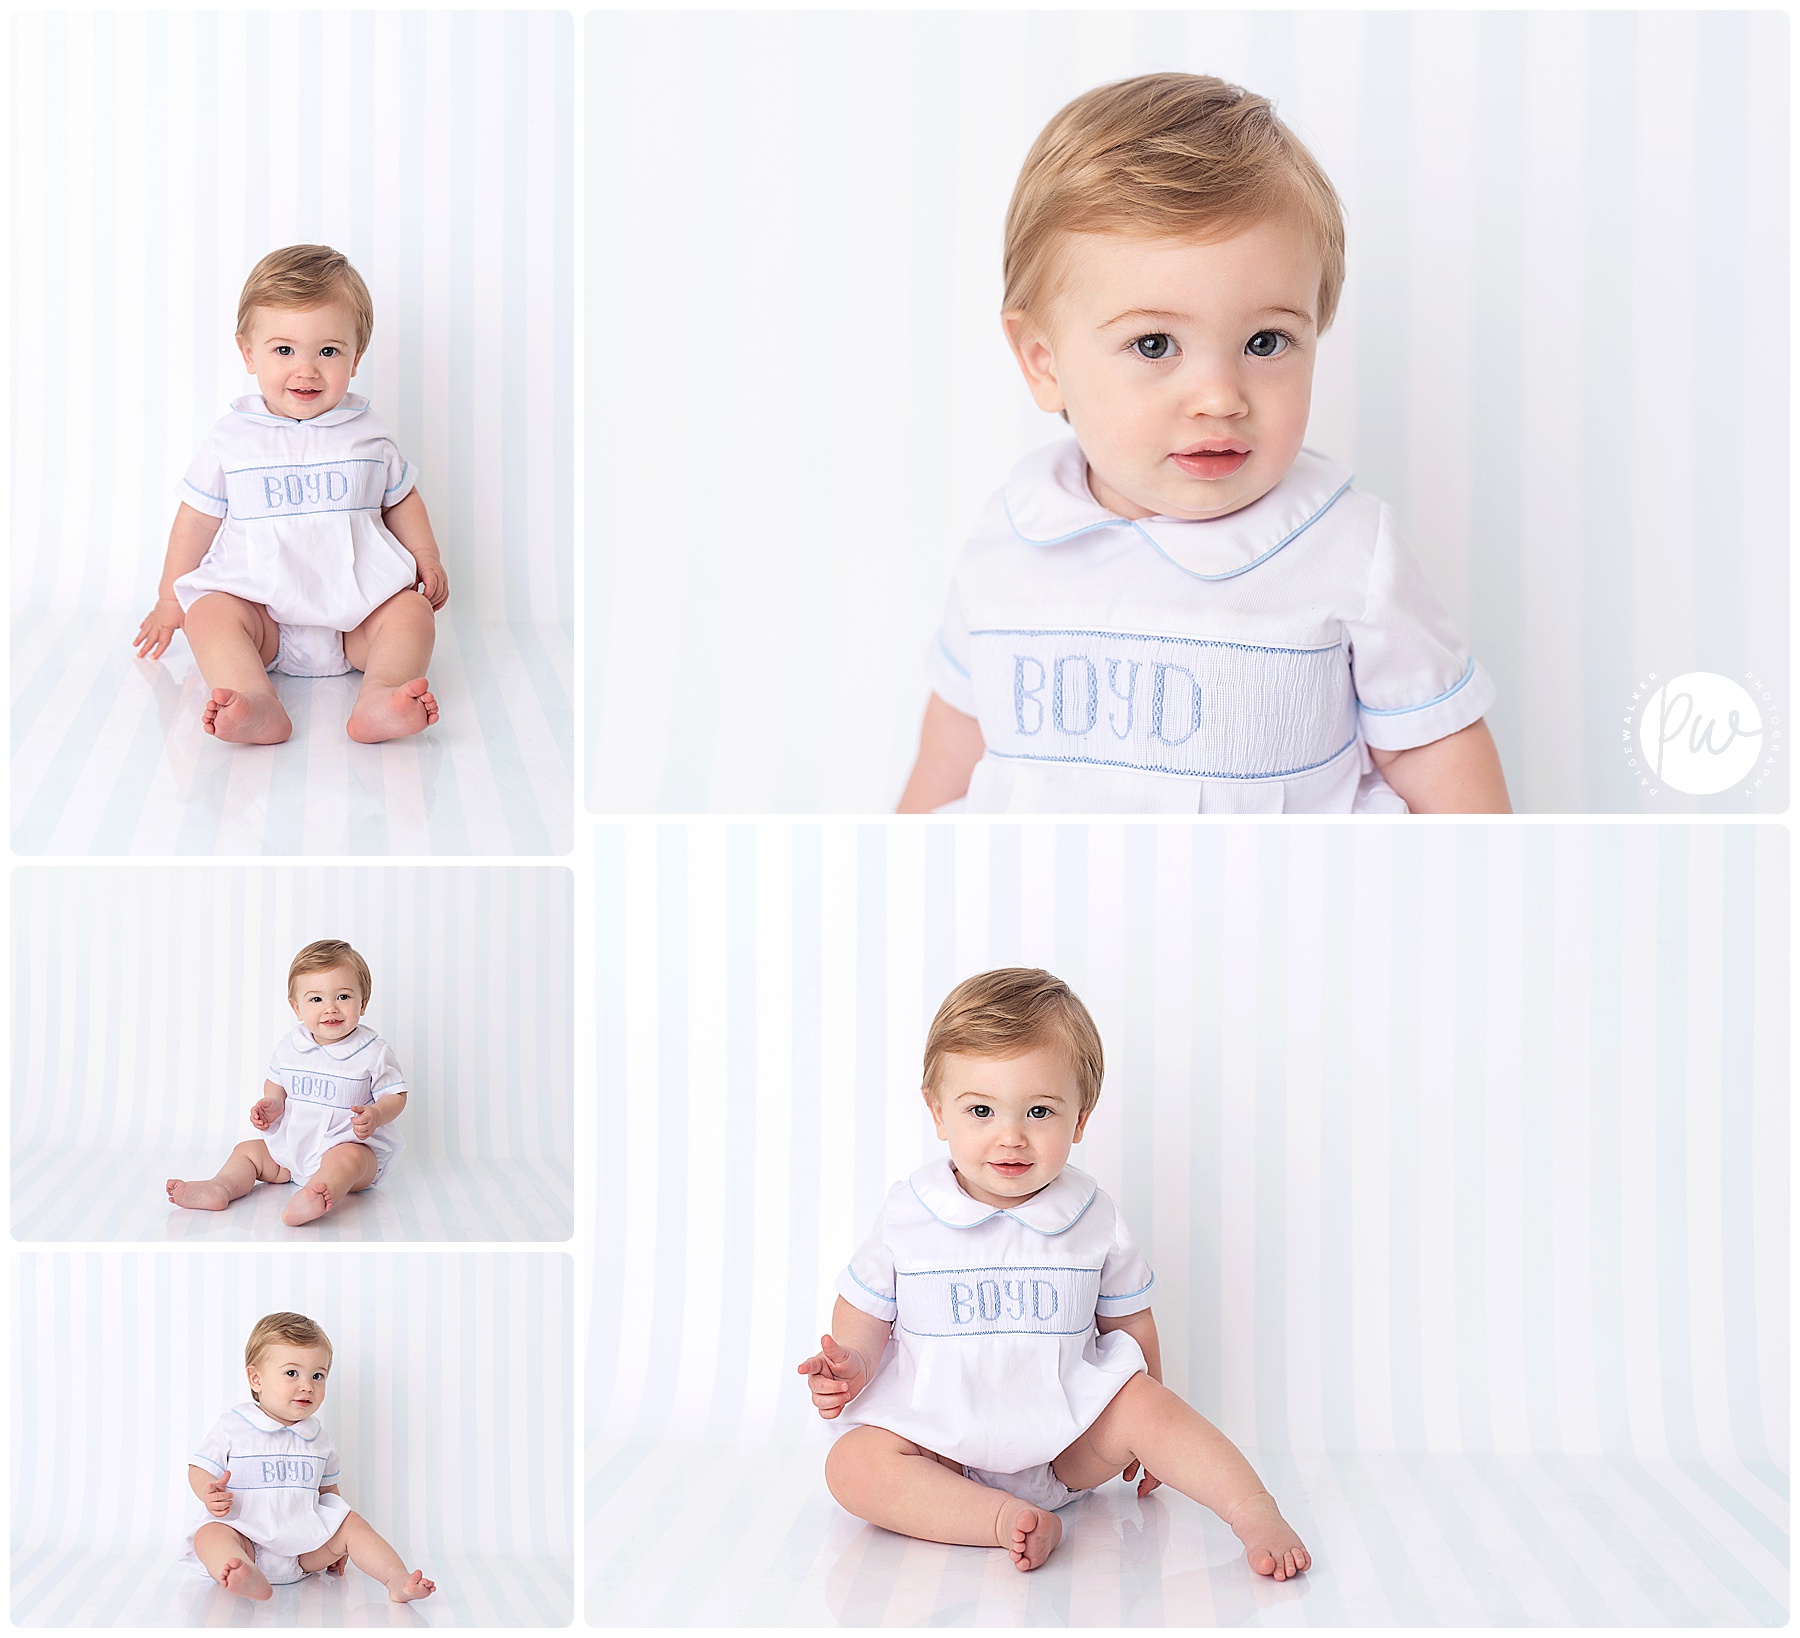 one year old boy sitting in the studio